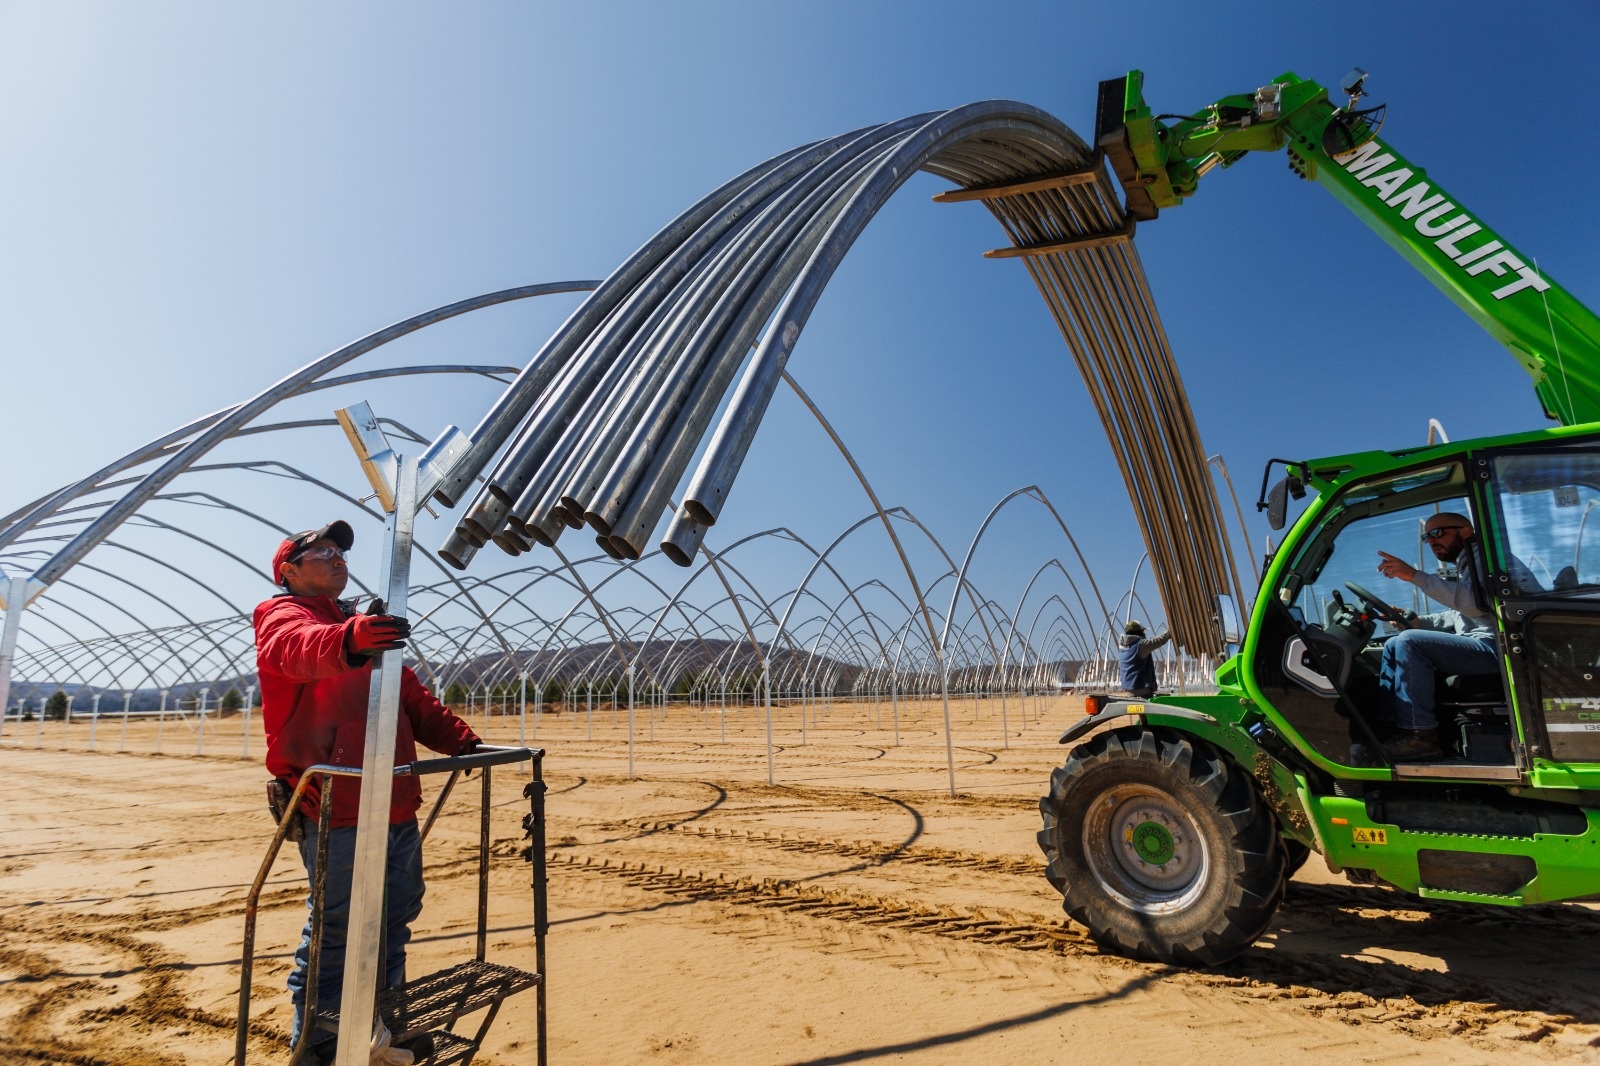 Lower tech high tunnel can double the yield compare to open field agriculture